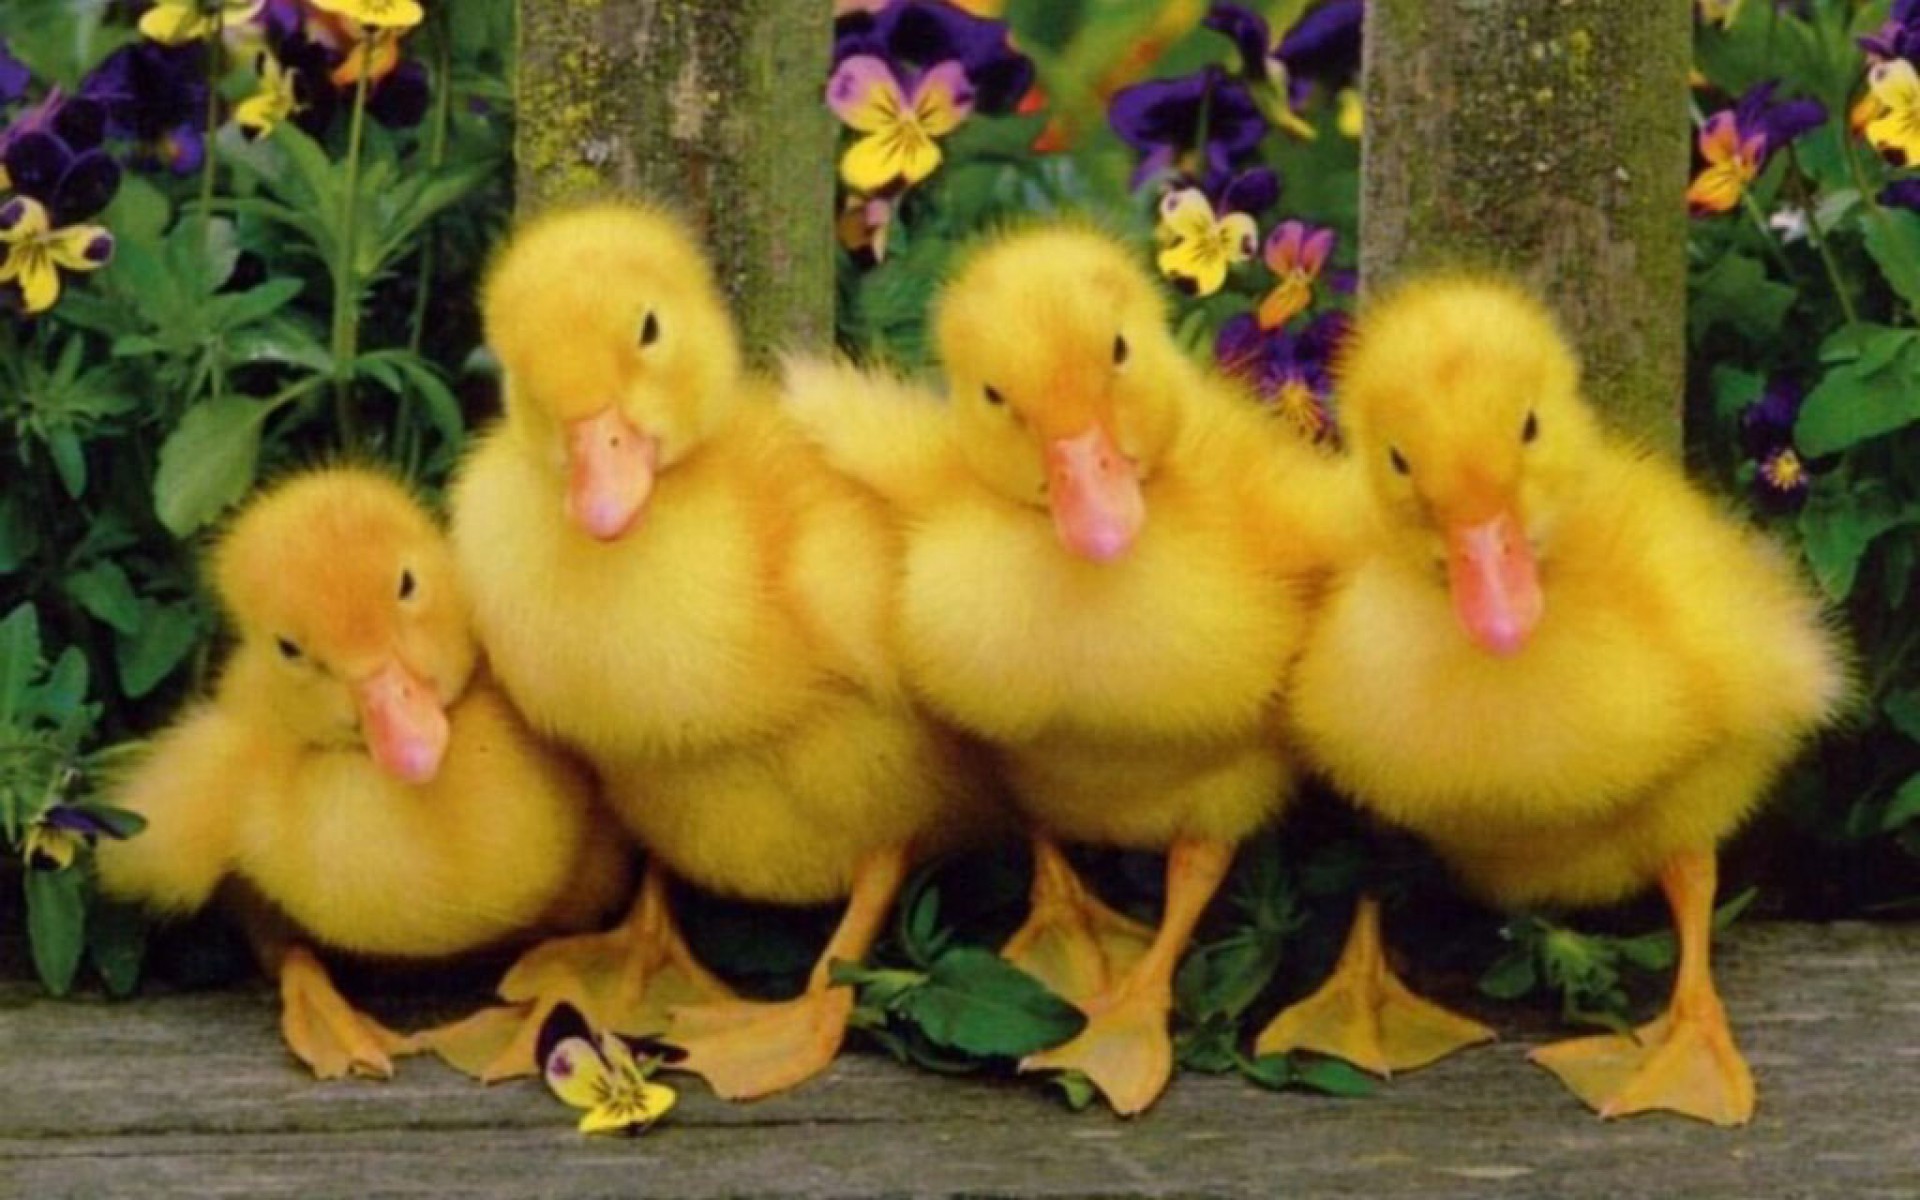 Four Baby Ducks in Row Pics | HD Wallpapers